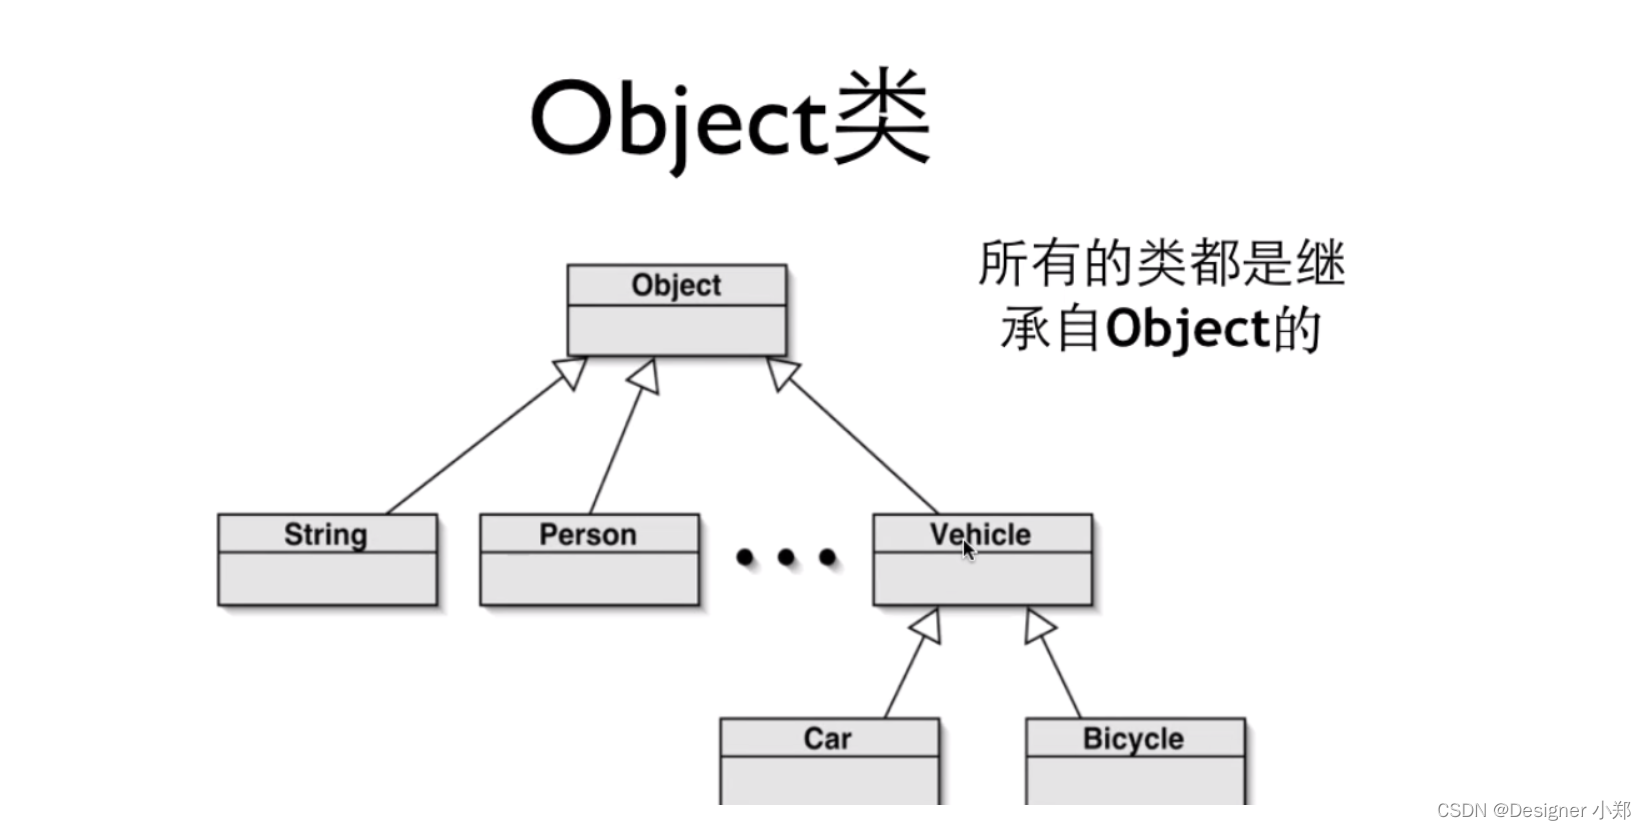 【JavaSE专栏37】Java常用类 Object 解析，万物皆对象